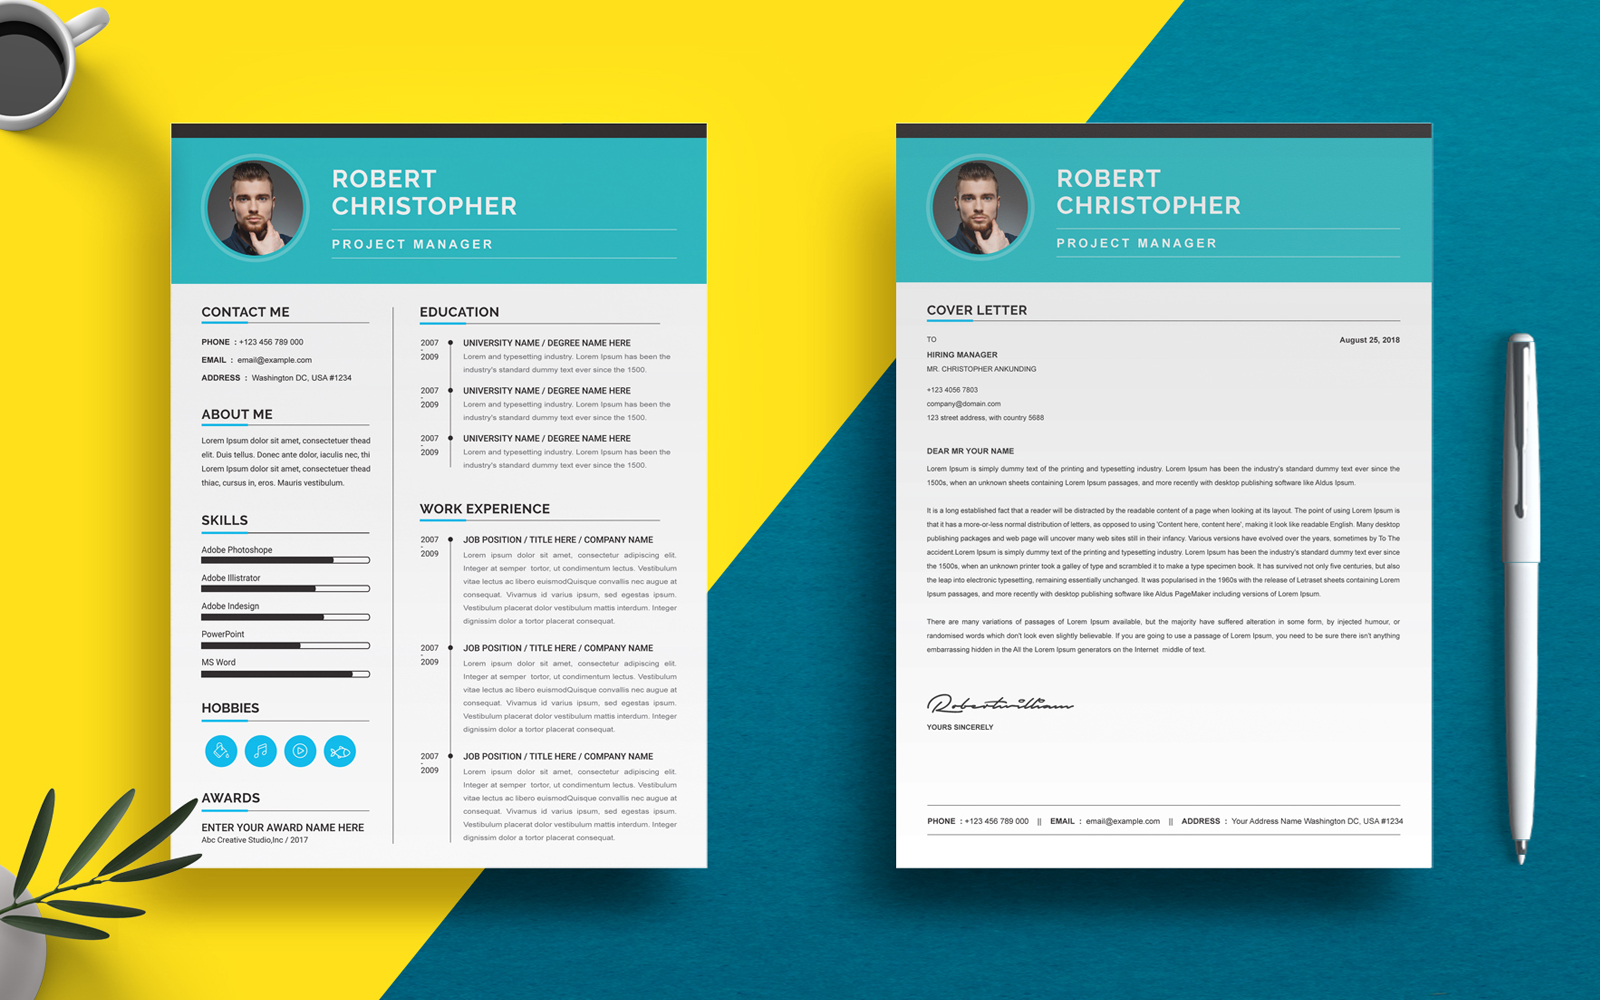 Robert Christopher - Project Manager Resume